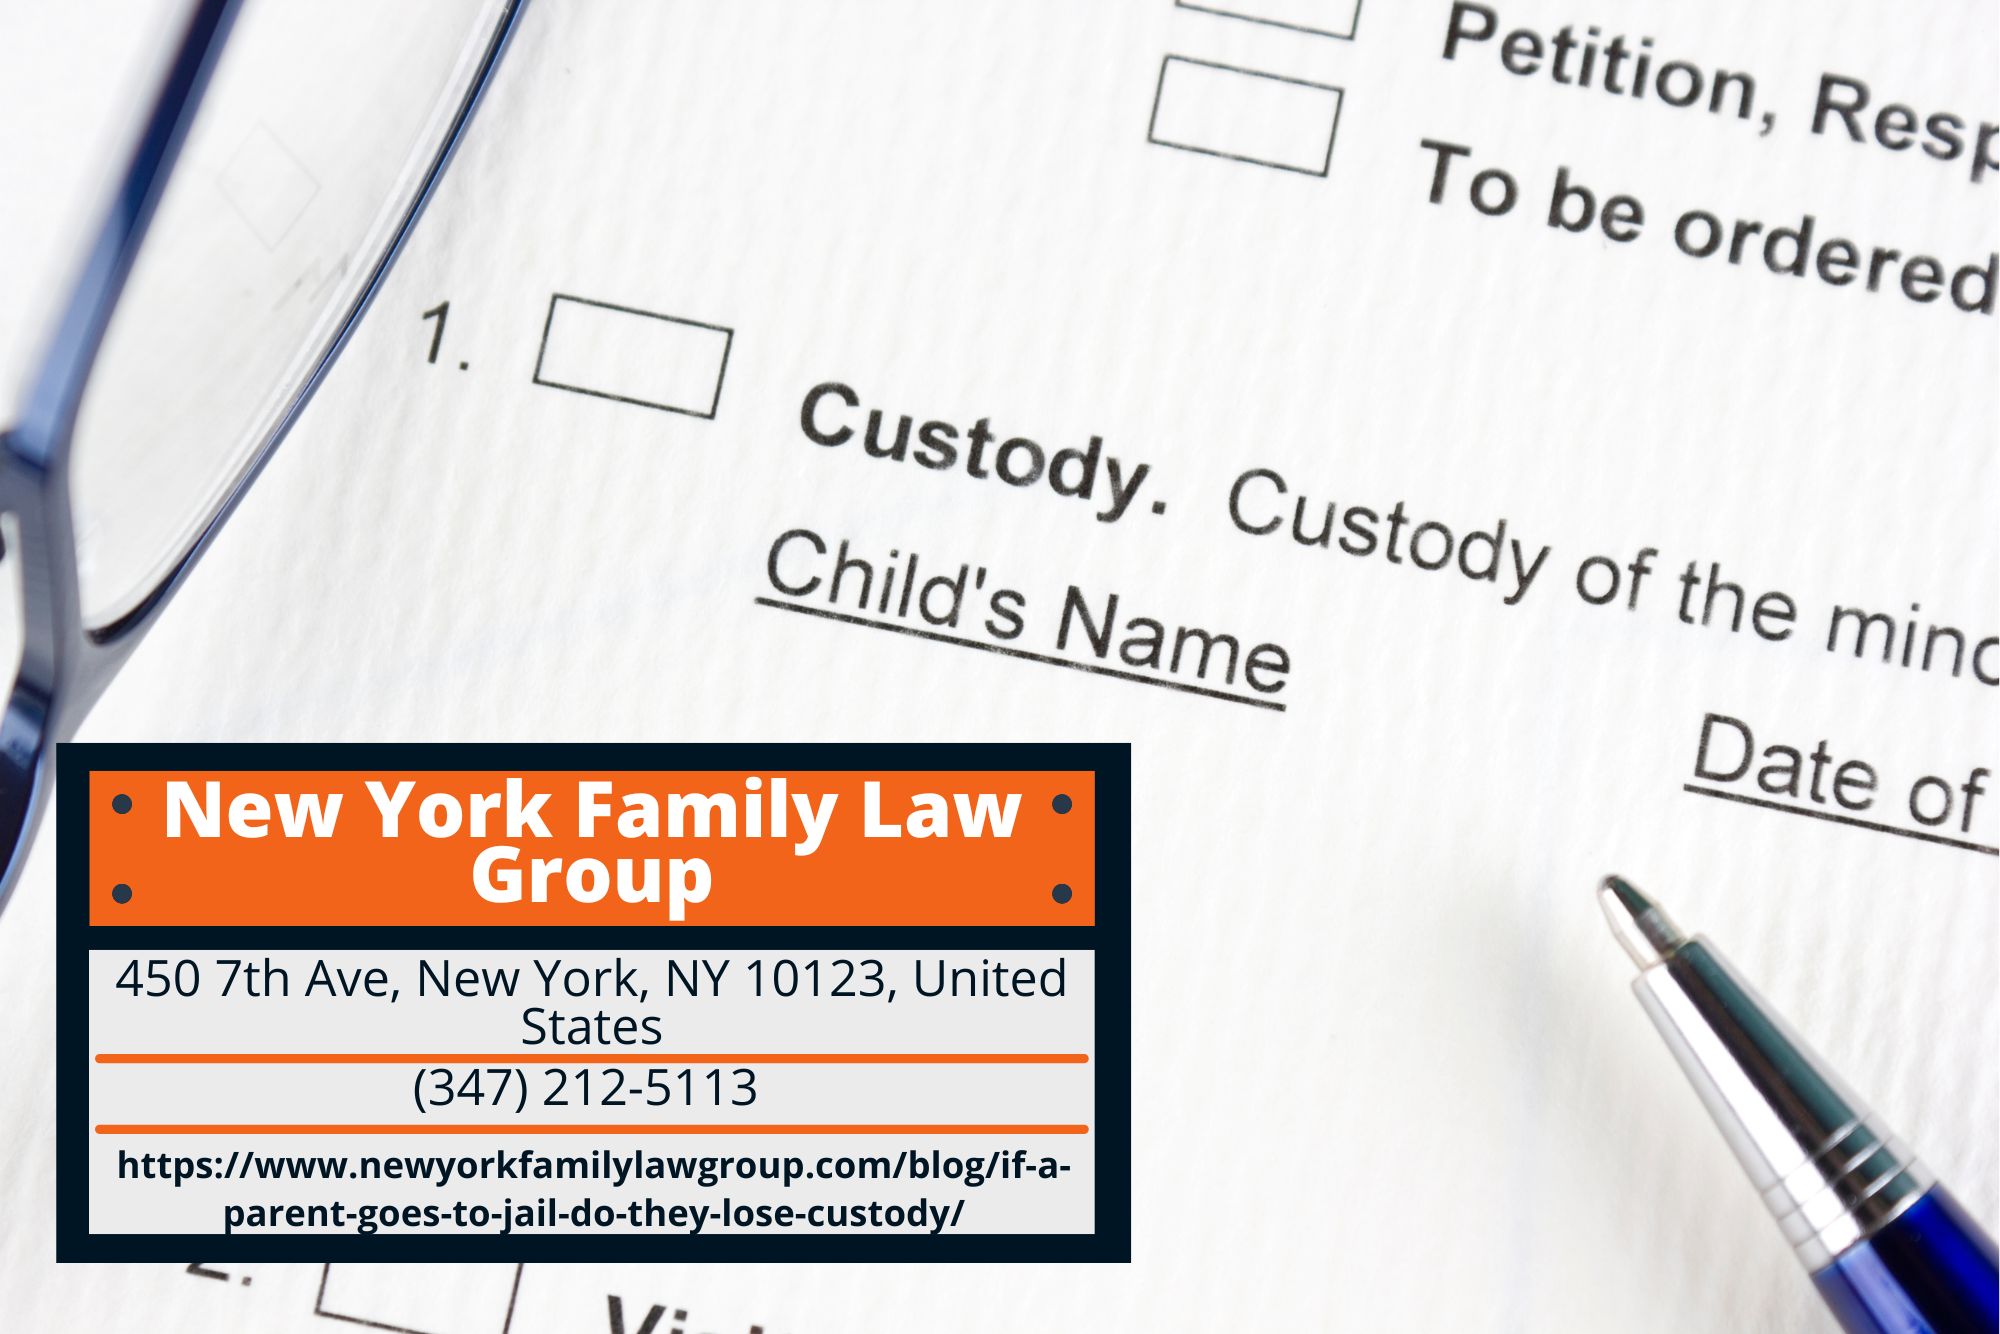 Manhattan Child Custody Attorney Martin Mohr Educates Parents on Safeguarding Rights in New Article